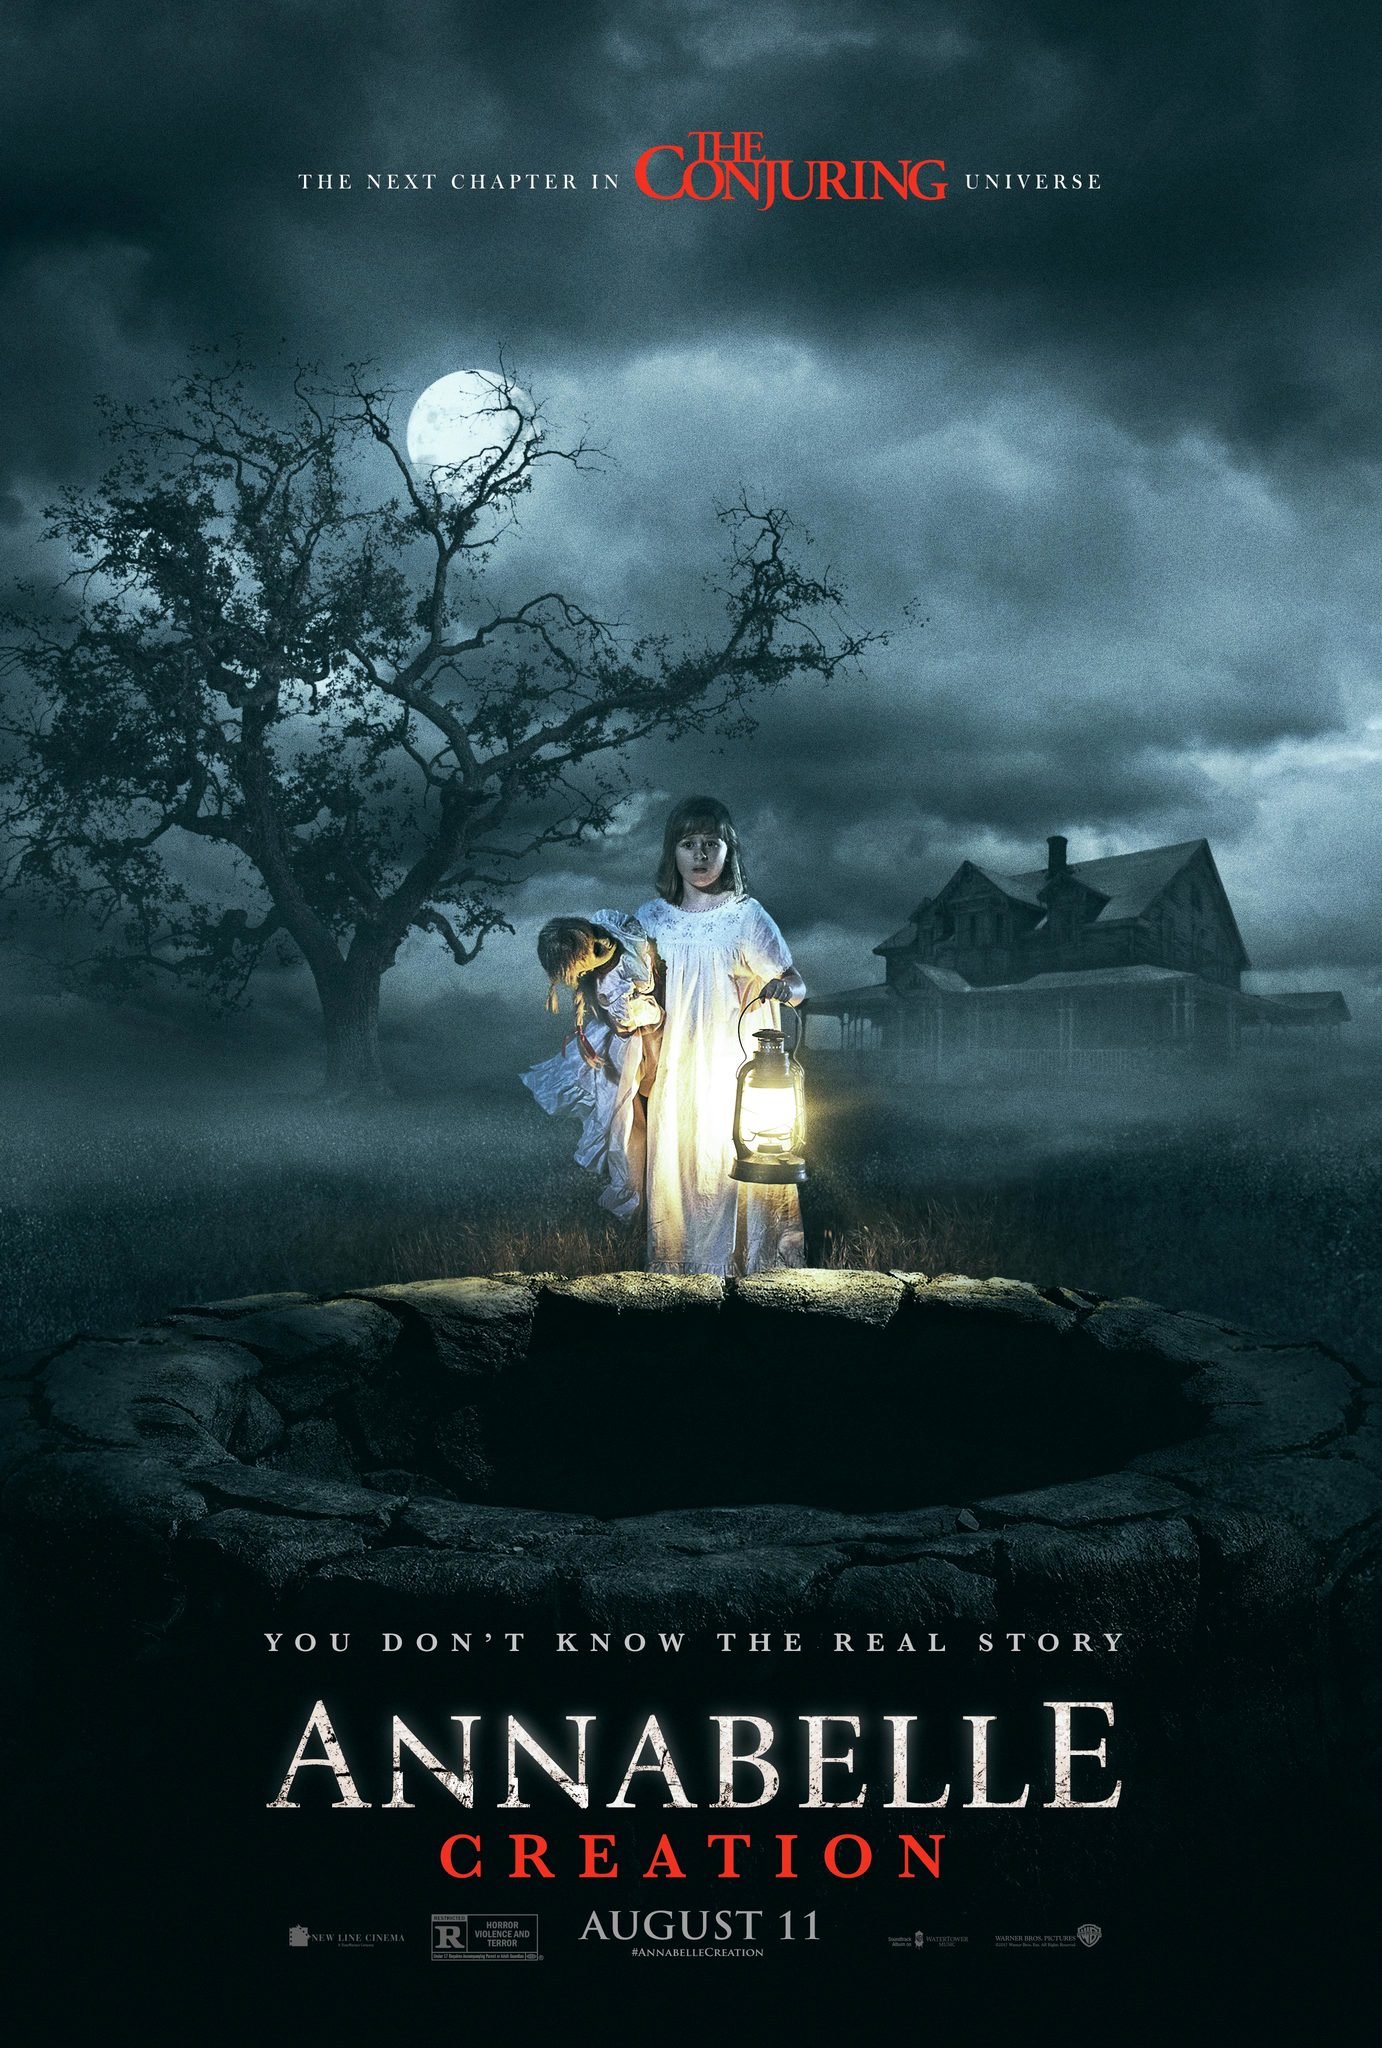 6. The Conjuring